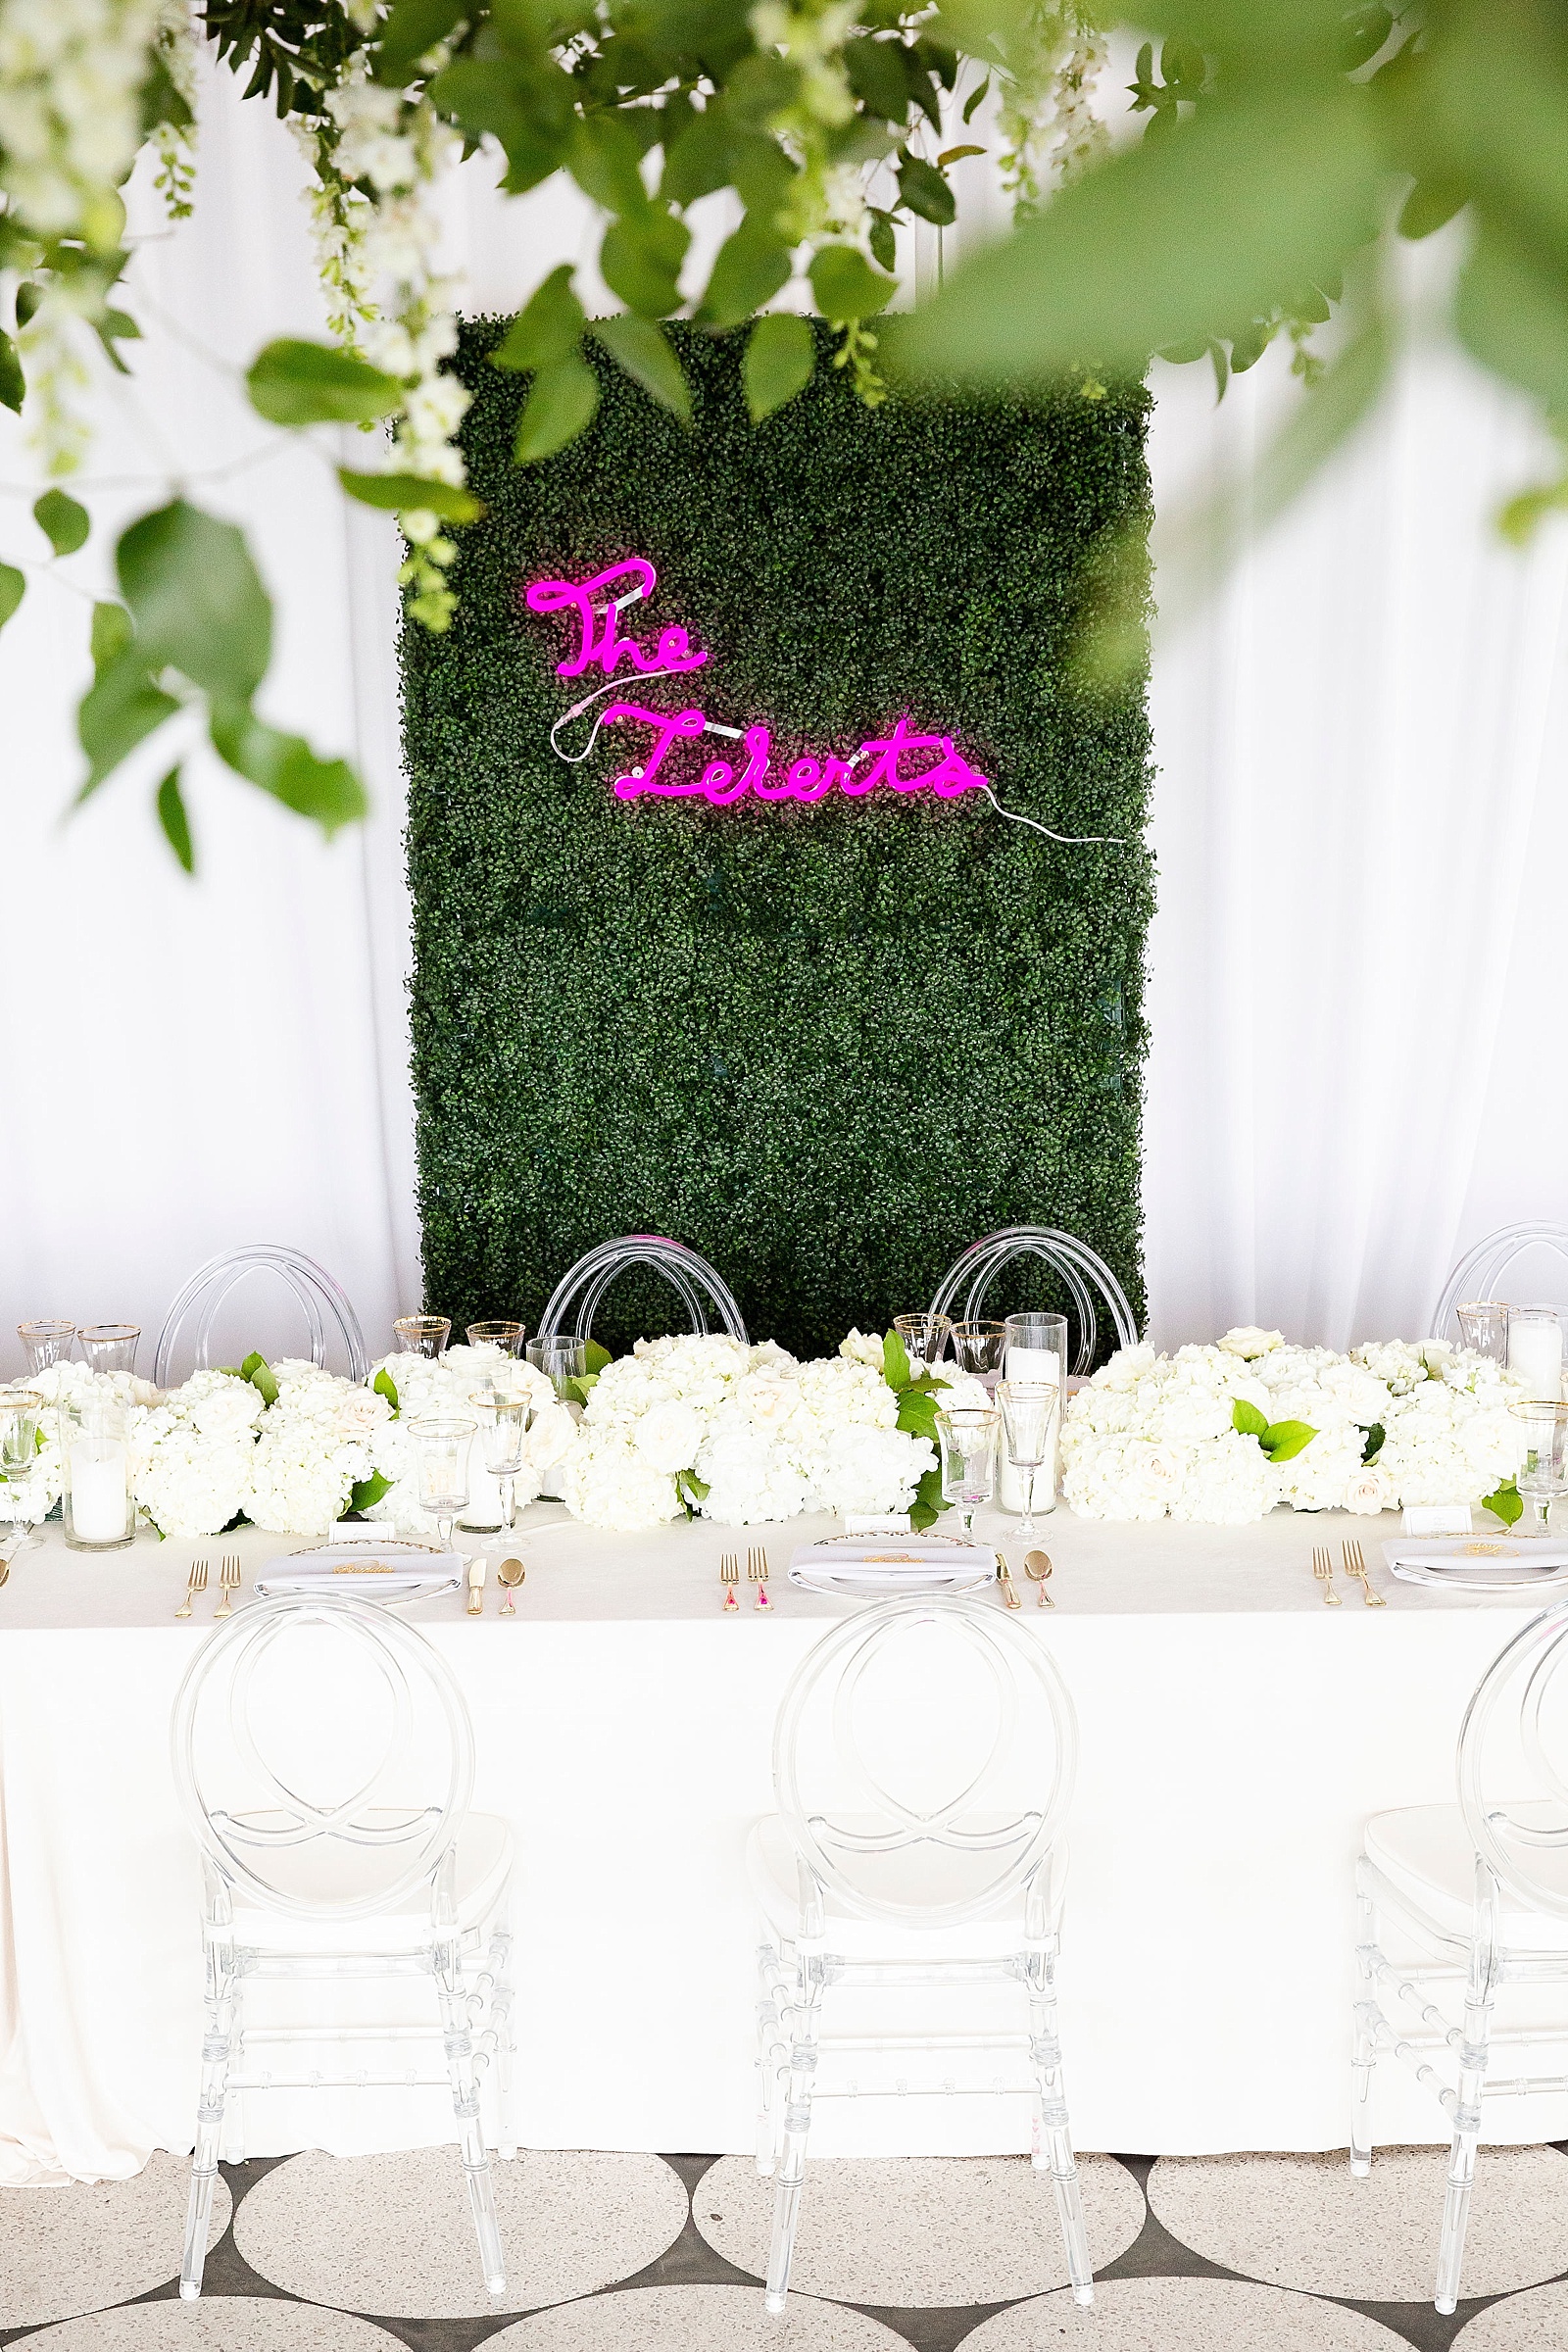 reception floral displays photographed by Randi Michelle Photography